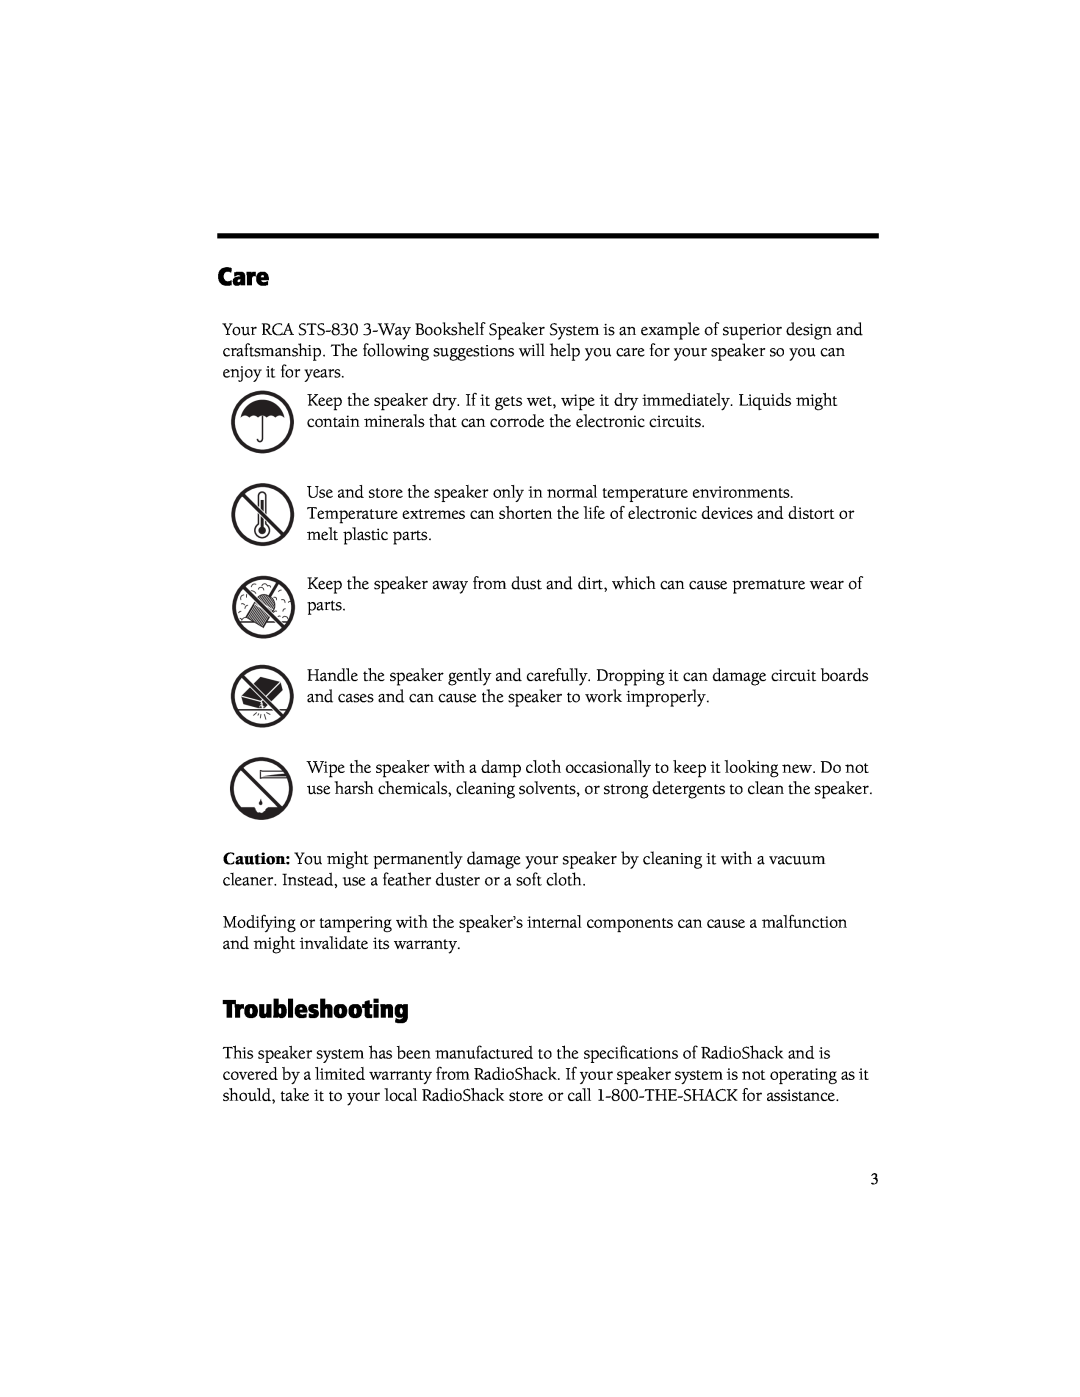 RCA STS-830 manual Care, Troubleshooting 